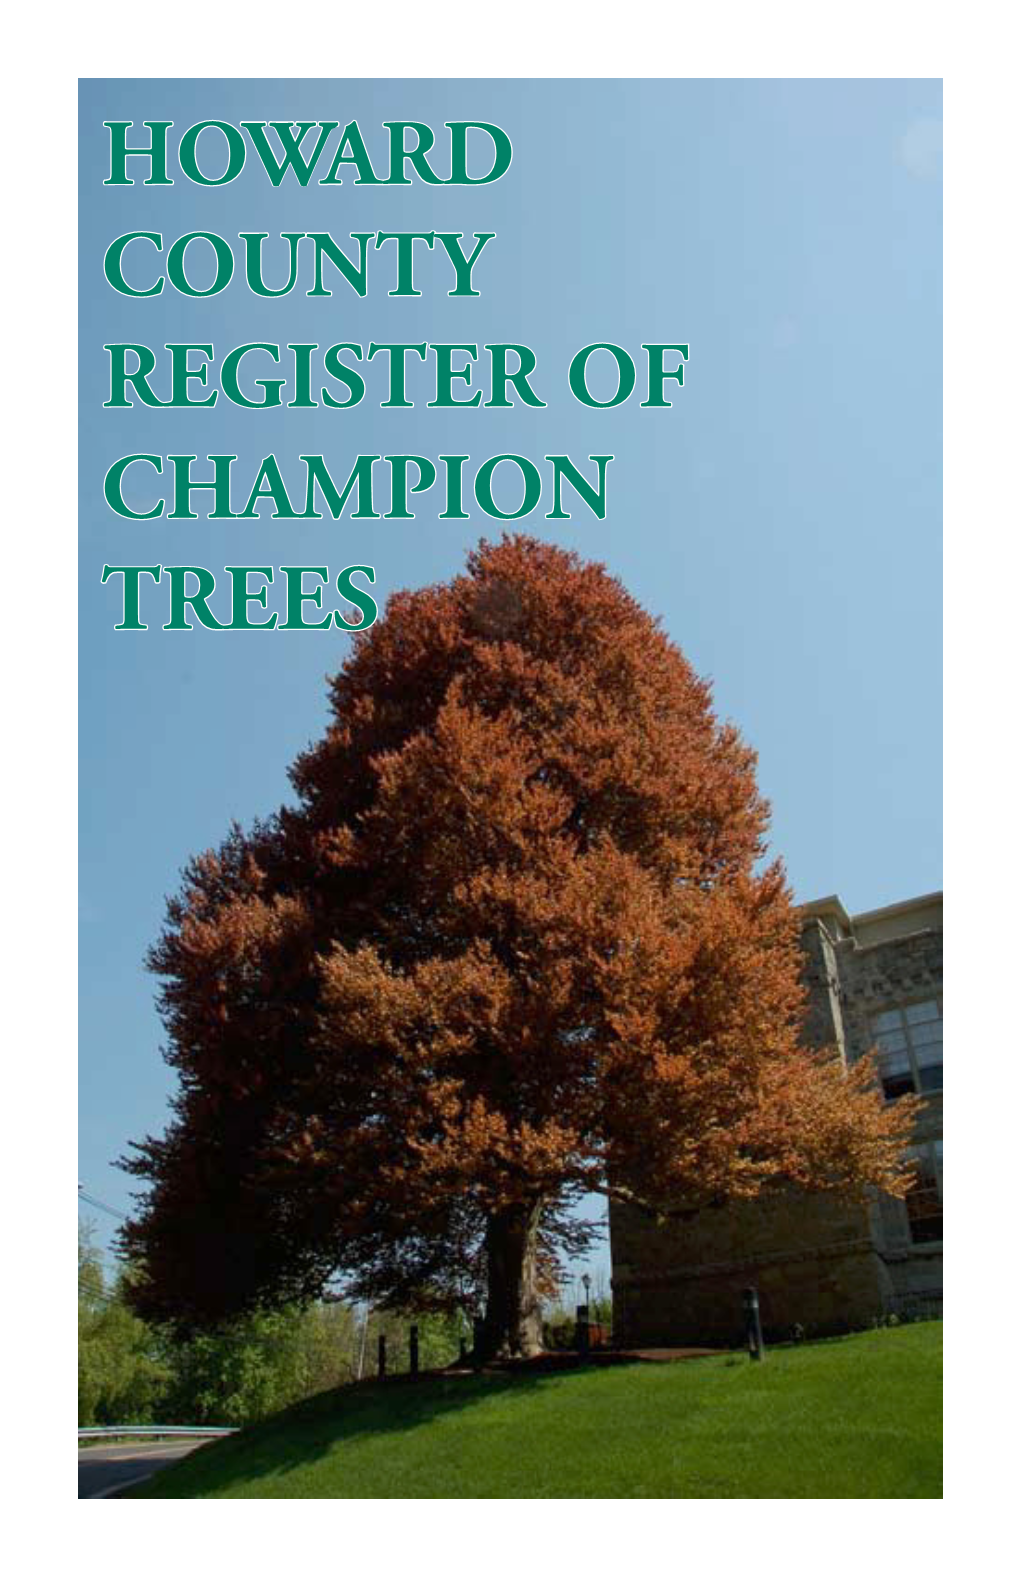 HOWARD COUNTY REGISTER of CHAMPION TREES August 1, 2007